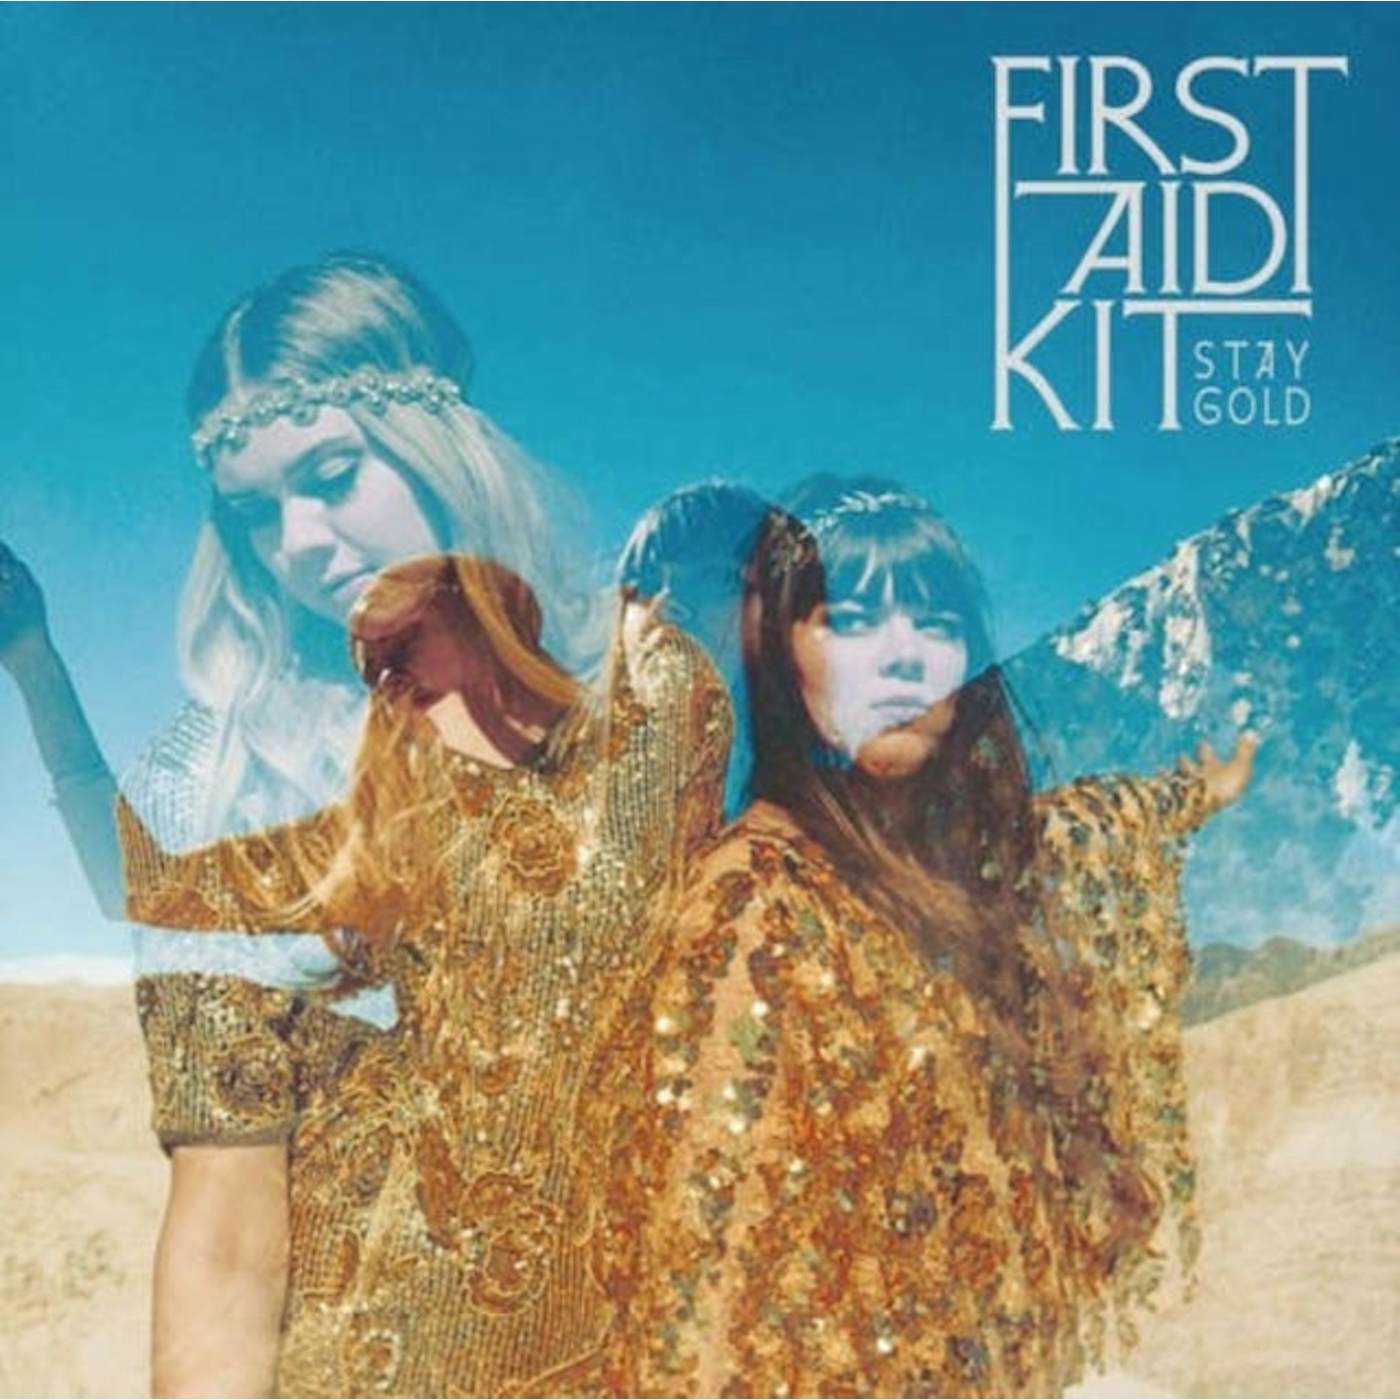 First Aid Kit LP Vinyl Record - Stay Gold